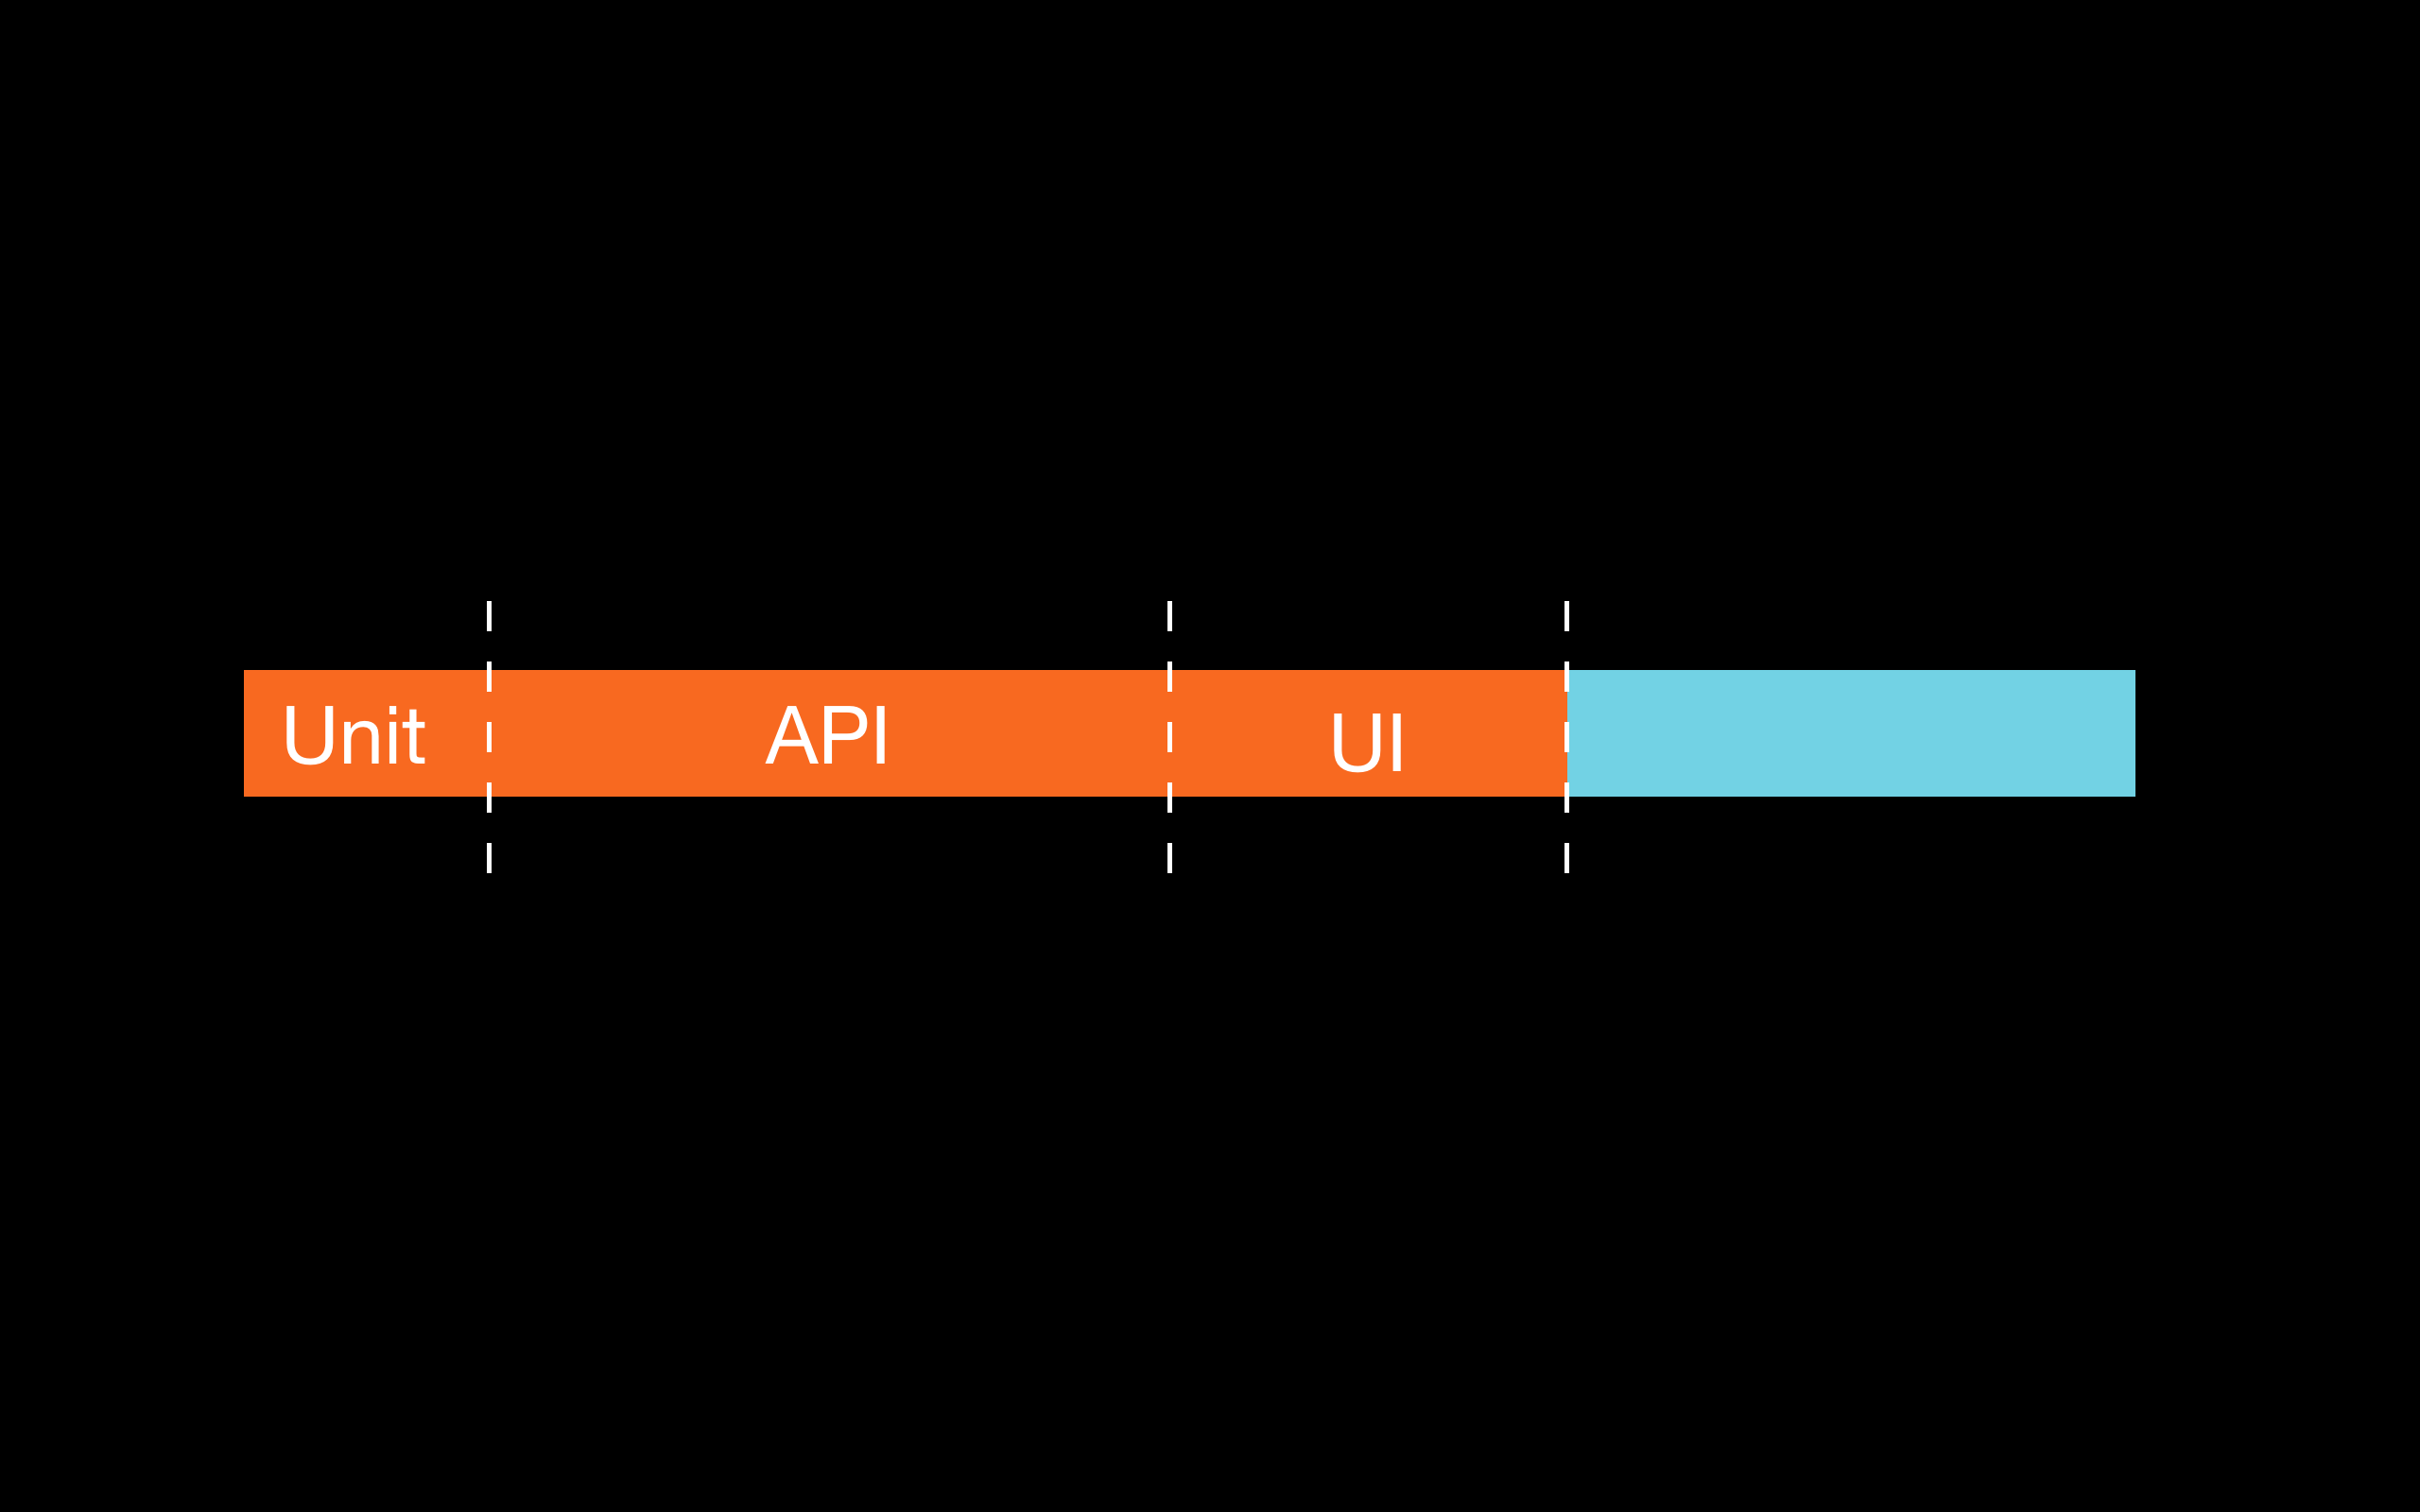 API tests detect most of the bugs (compared to unit and UI)